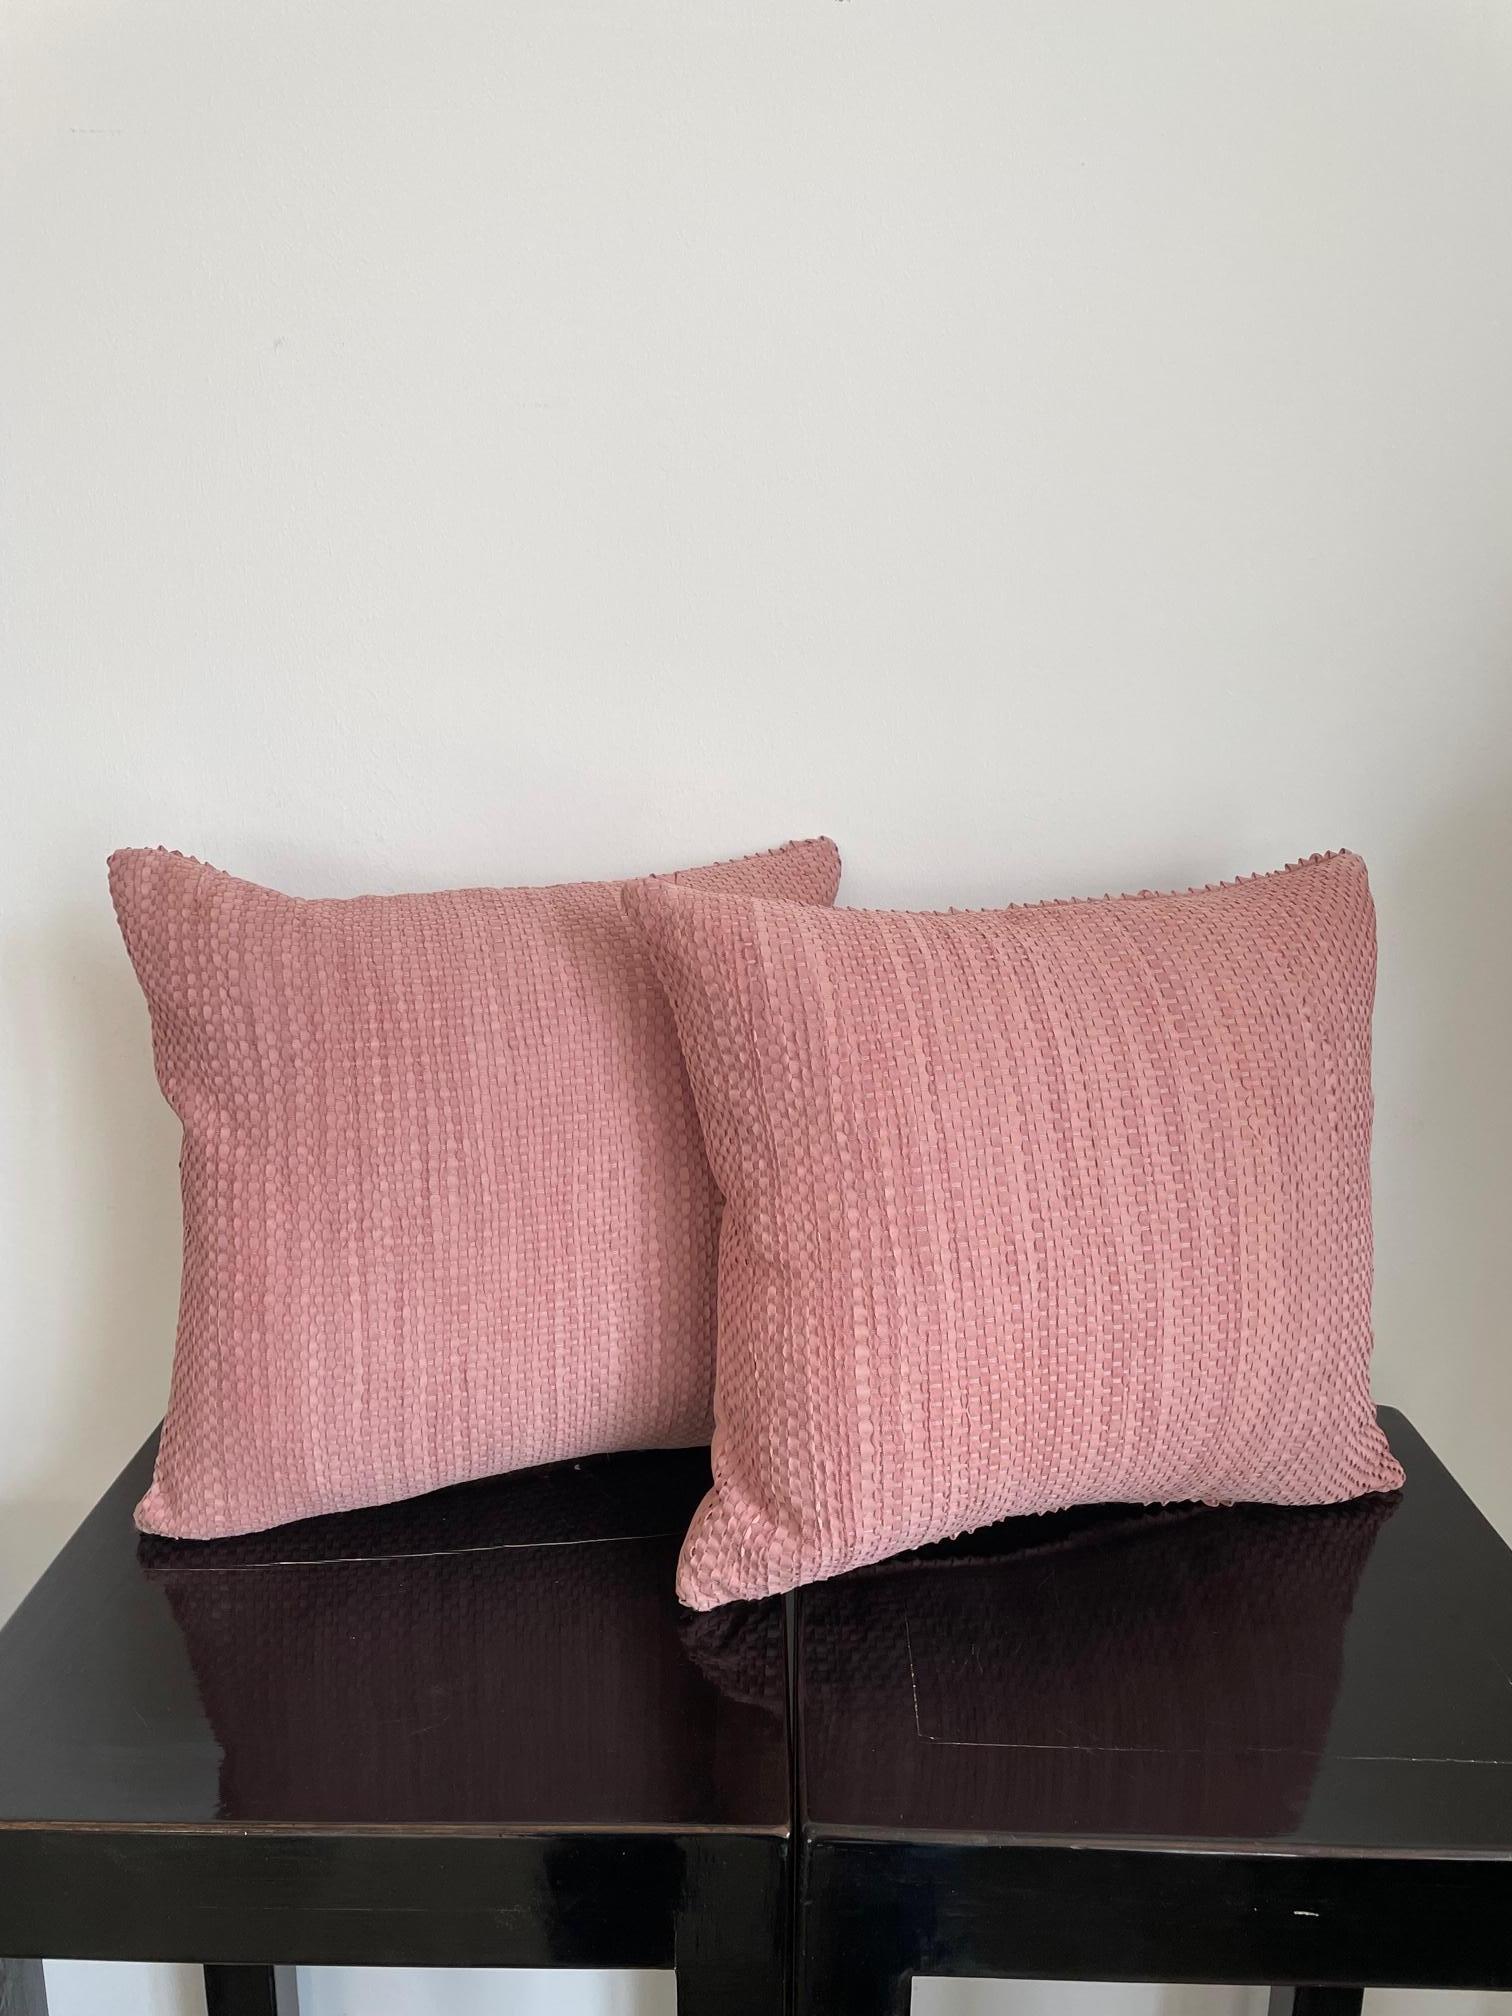 Hand woven Suede cushions color Pale Pink - see image no. 6 for color reference , back side with Suede as shown on image, cushion size 45x45cm, silk lining, inner pad with new feathers.